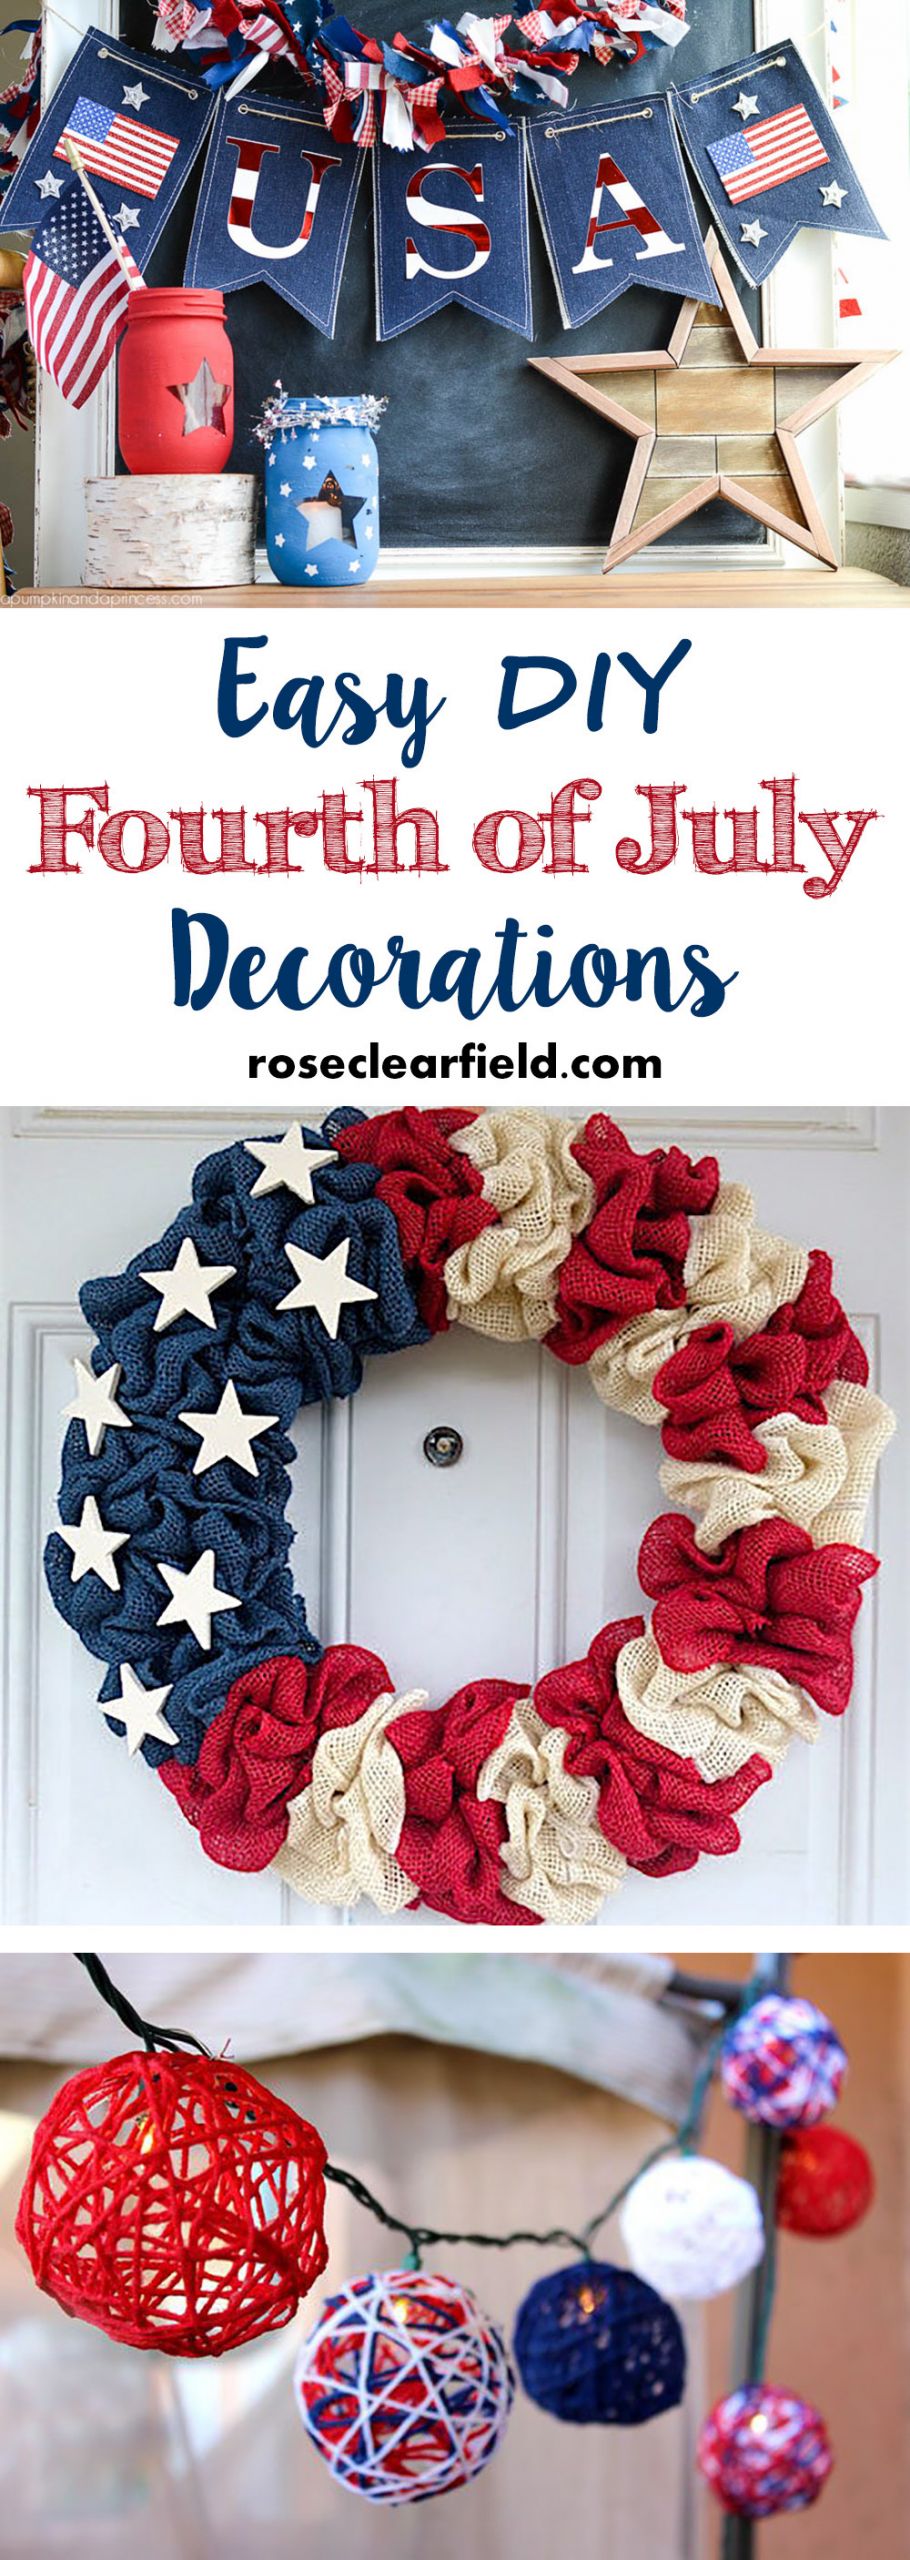 Diy Fourth Of July Decorations
 Easy DIY Fourth of July Decorations • Rose Clearfield